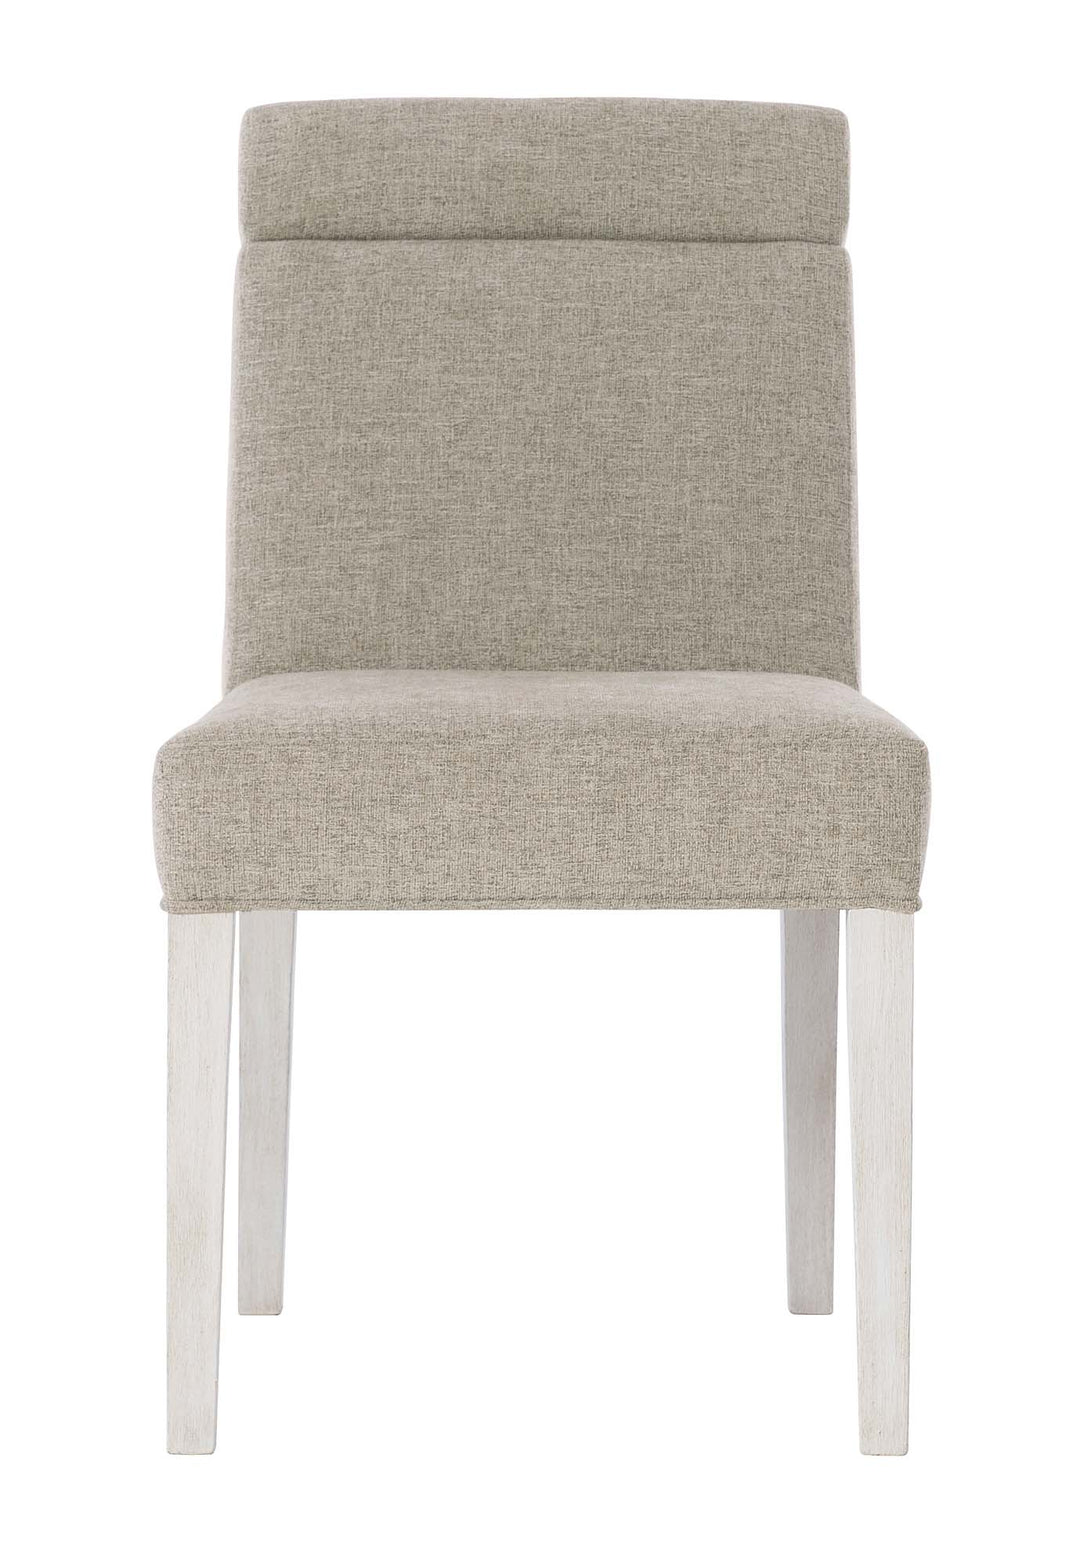 FOUNDATIONS SIDE CHAIR LINEN